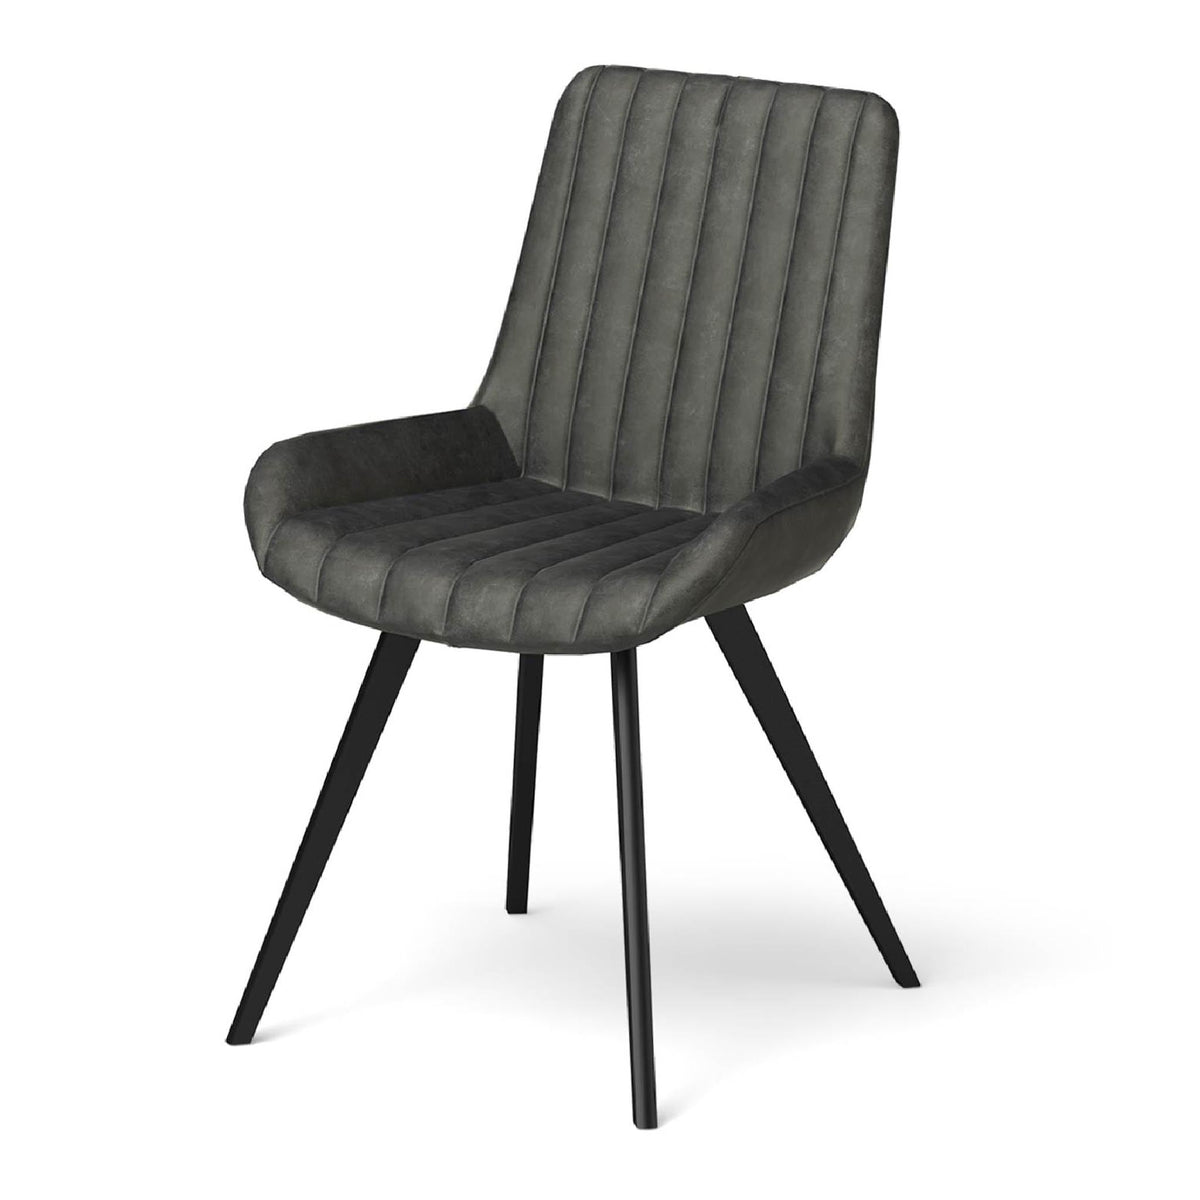 Soho Dining Chair with soft waxed coated seating